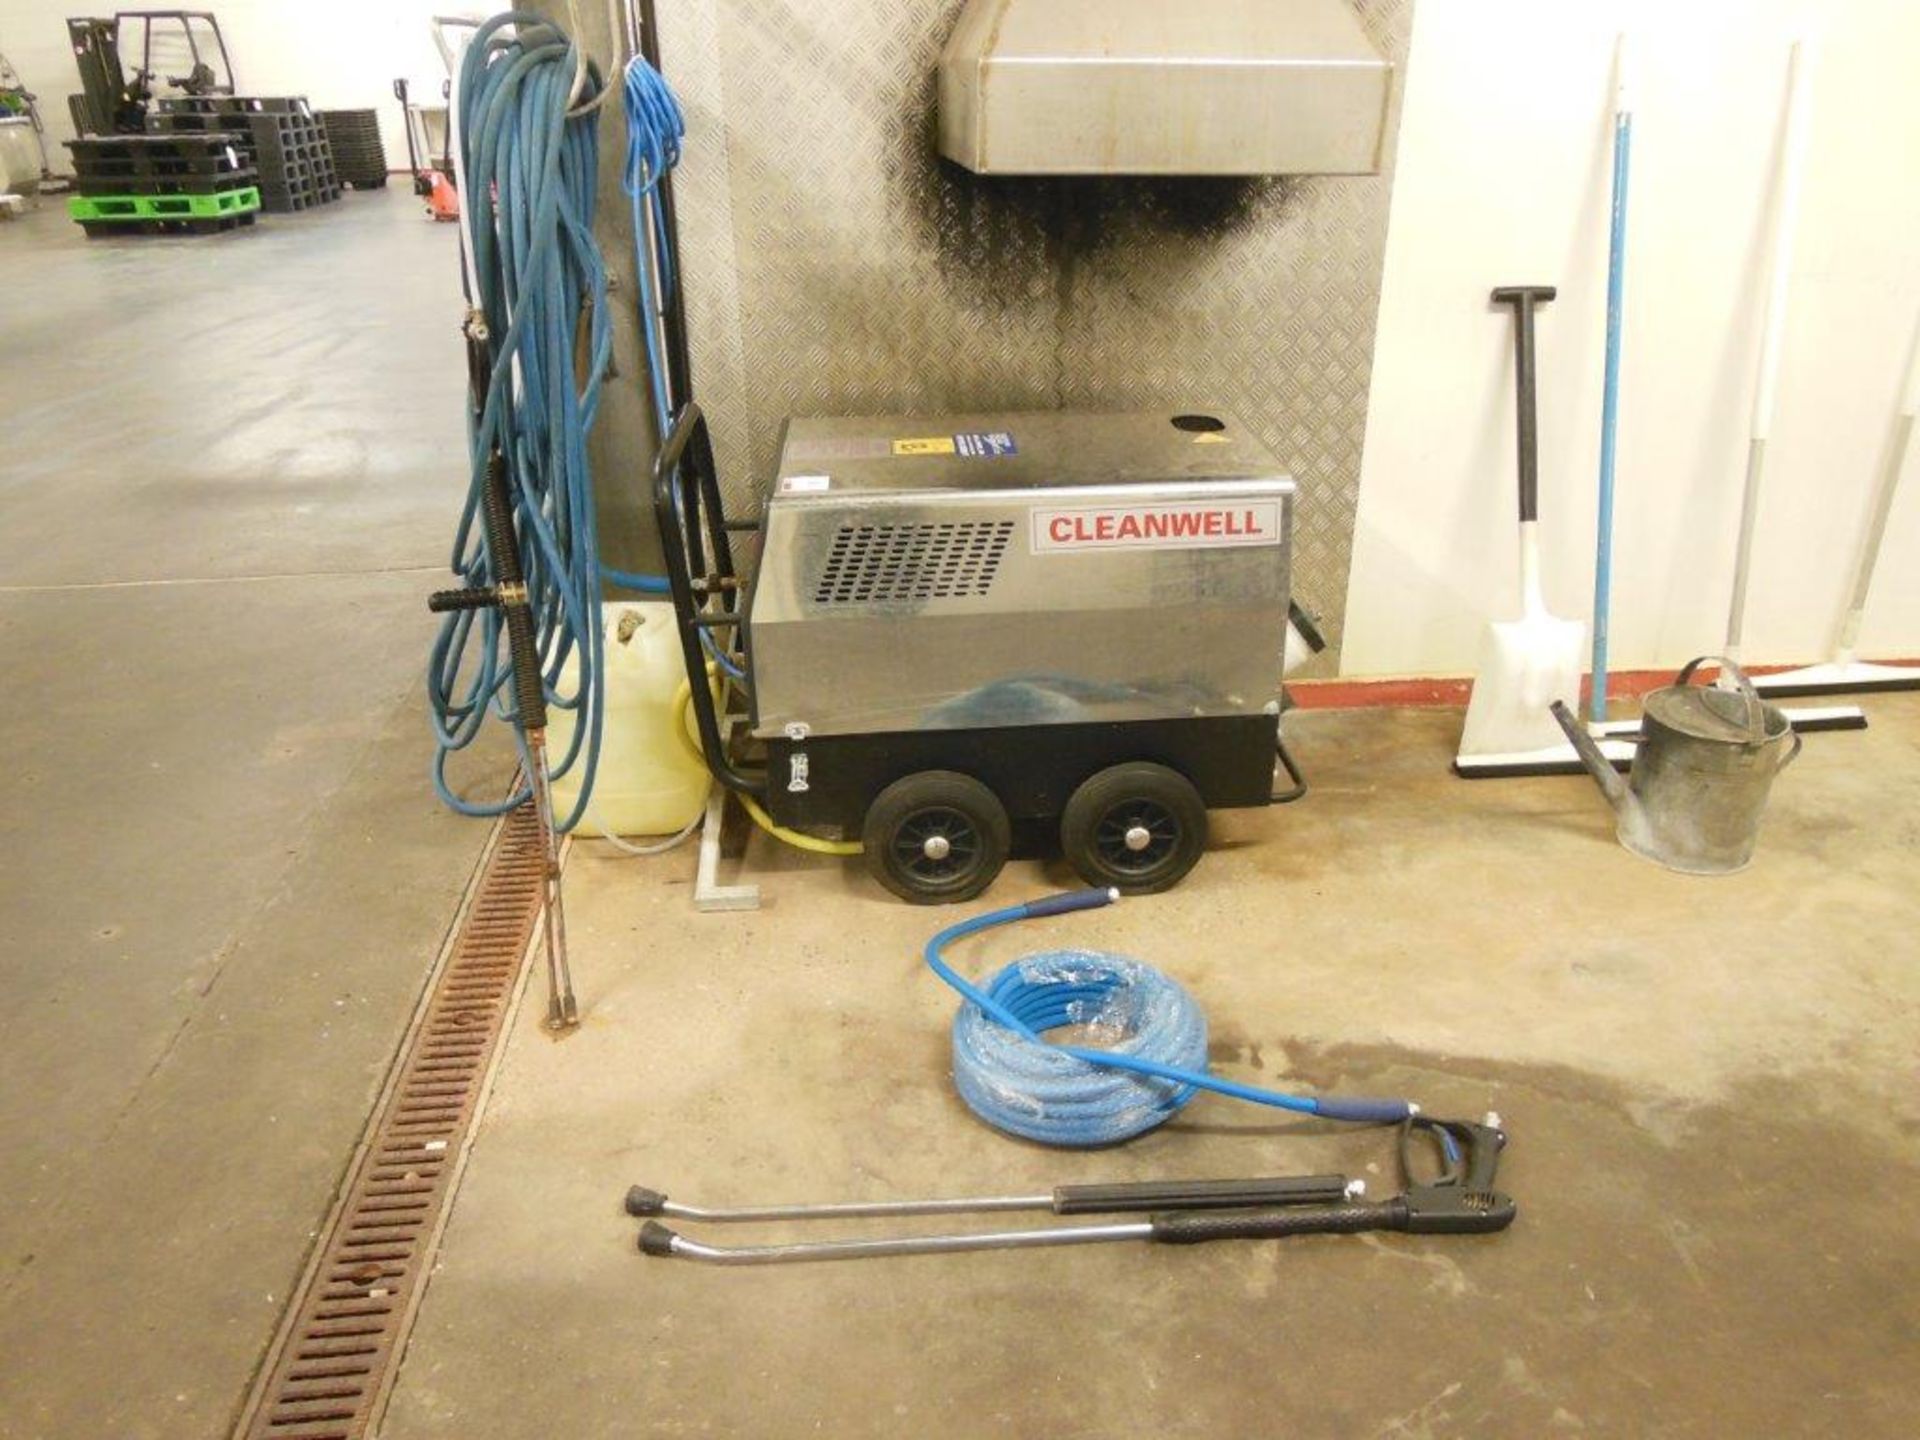 CLEANWELL stainless steel paraffin fired steam cleaner with hose and lance - Image 2 of 3